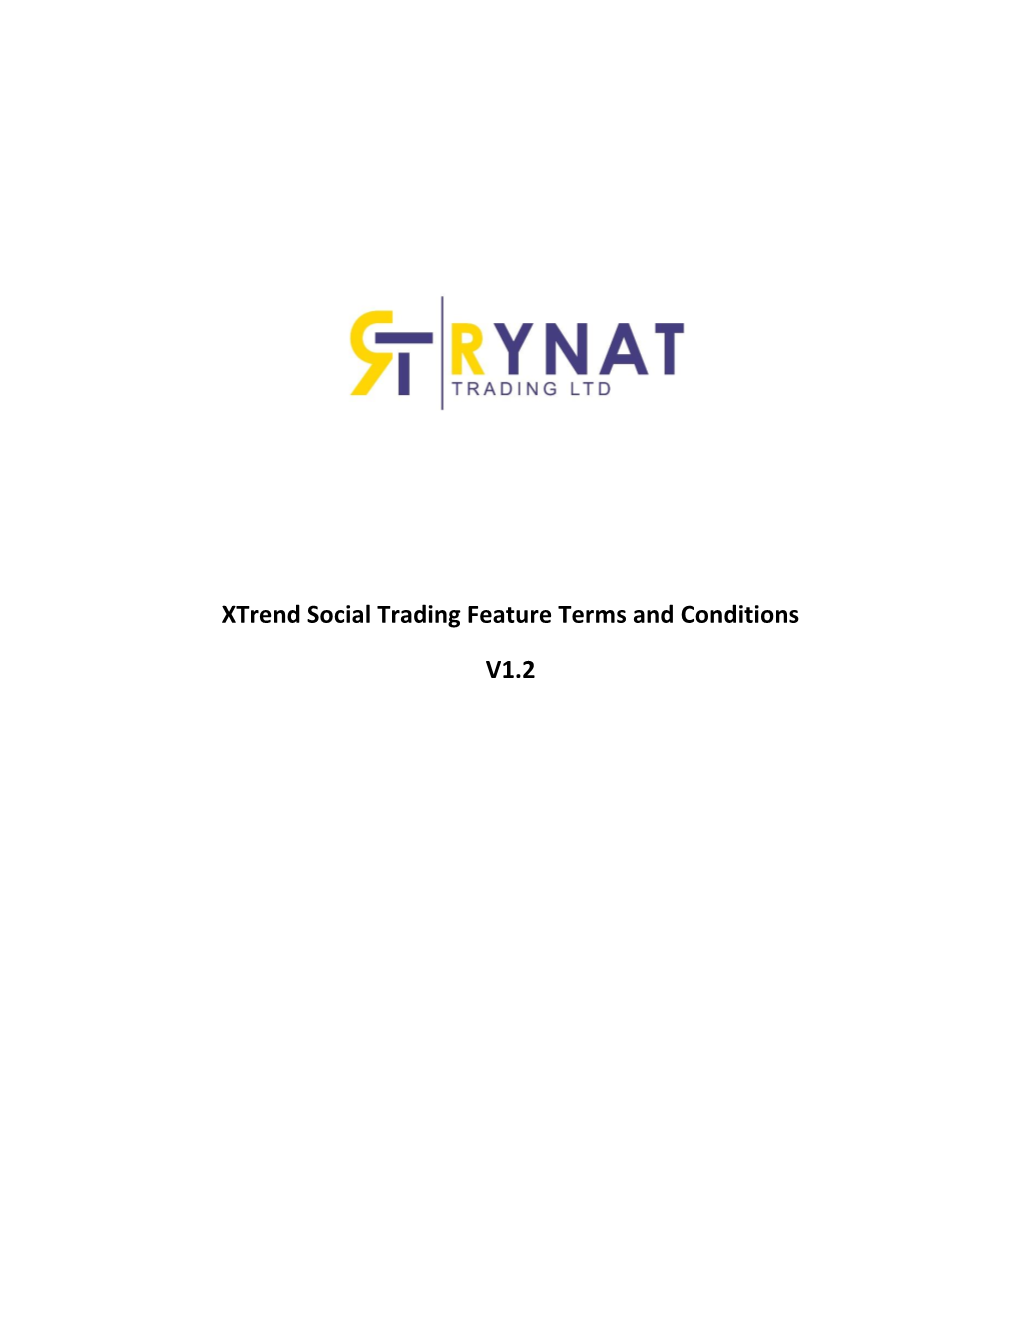 Xtrend Social Trading Feature Terms and Conditions V1.2